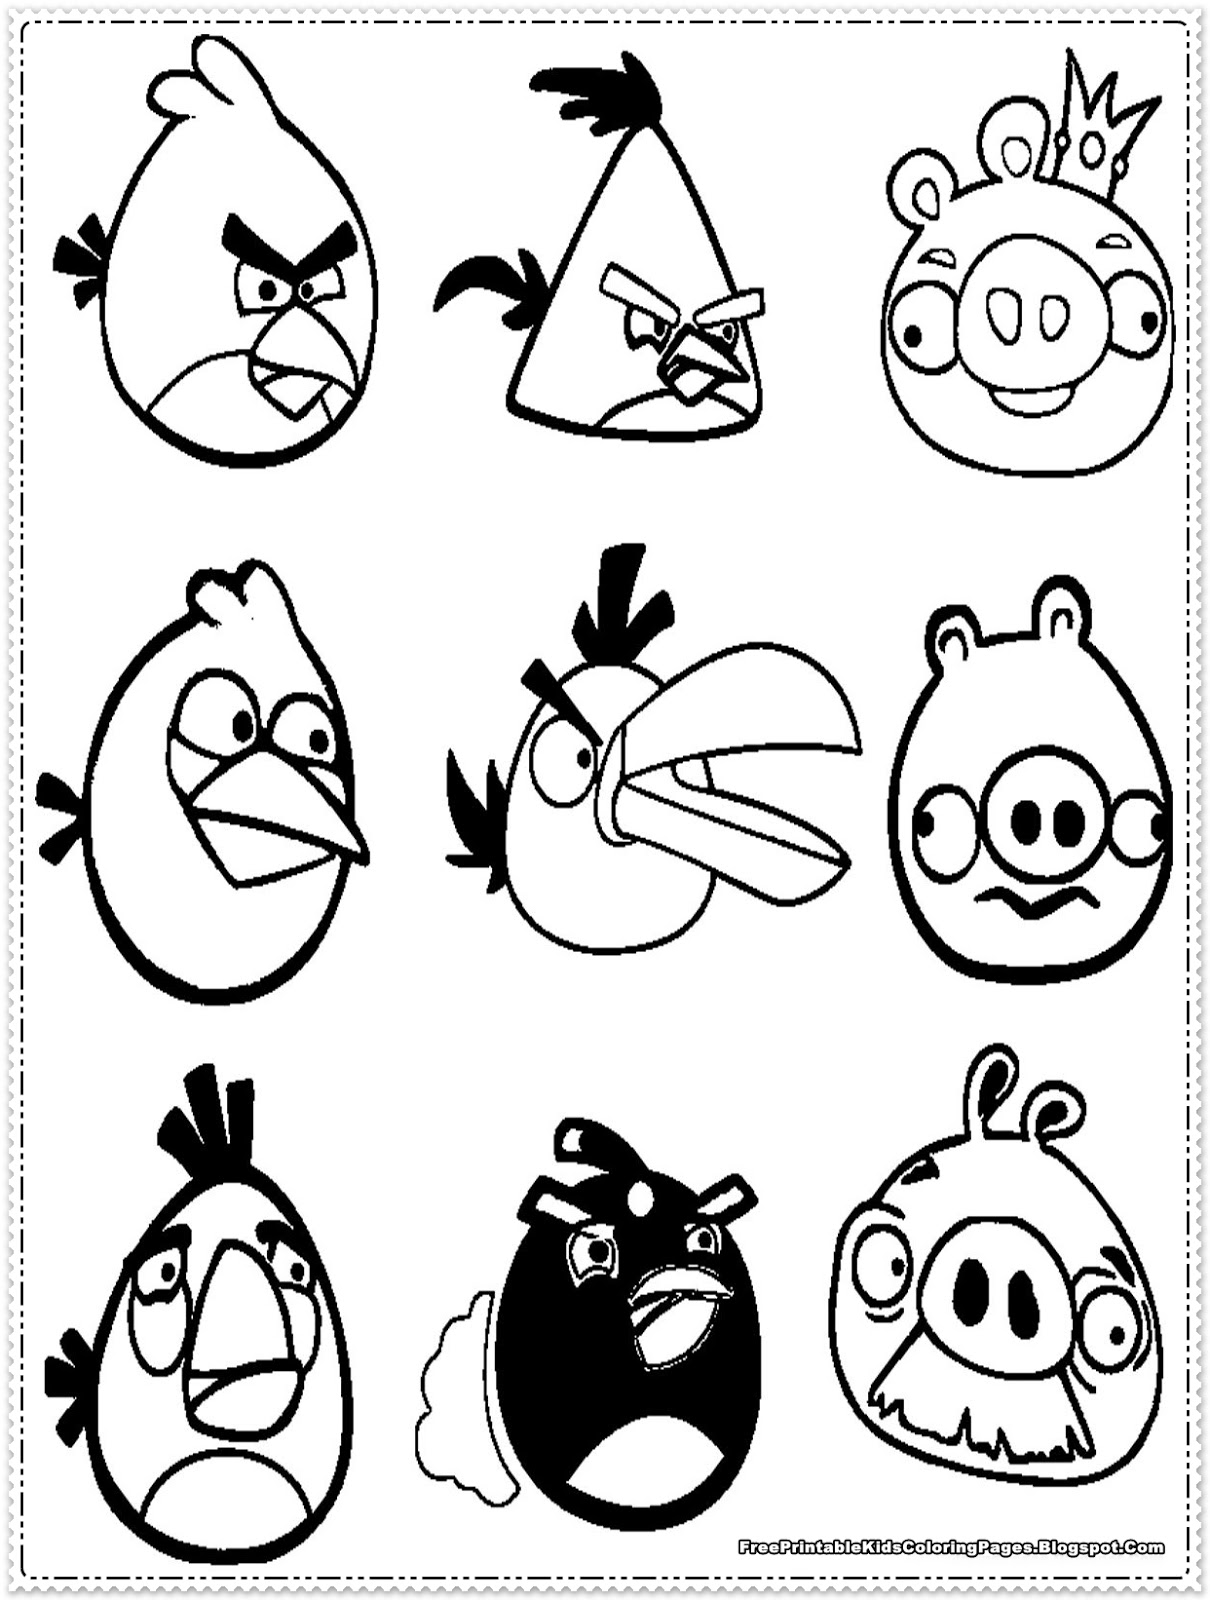 Download Angry Birds kids Coloring Pages - Free Printable Kids Coloring Pages